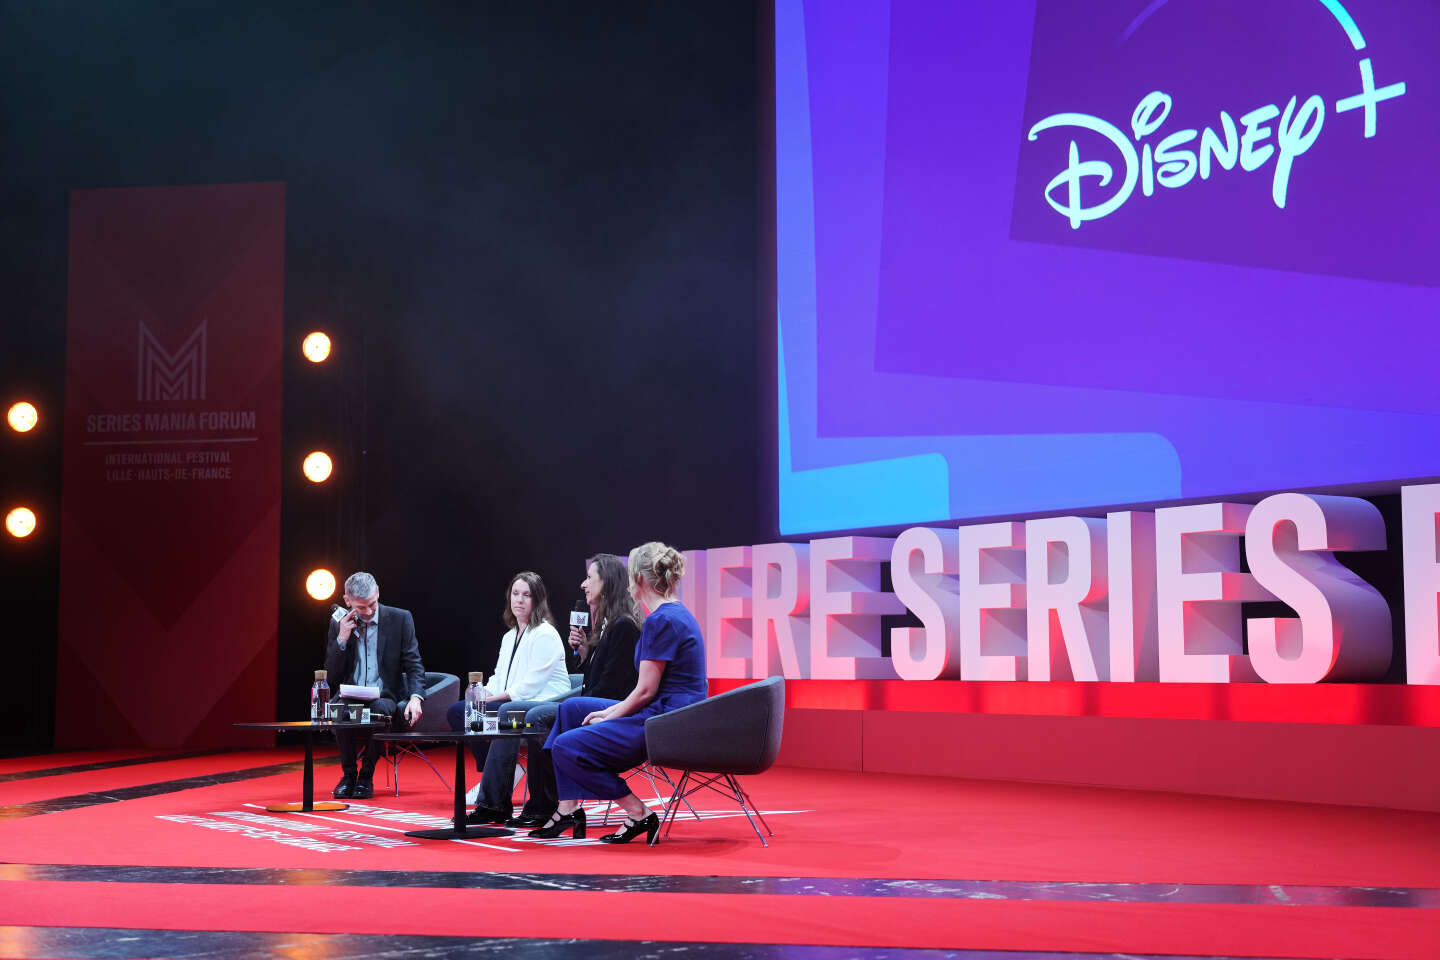 At Series Mania, the platforms storm austerity and marketing